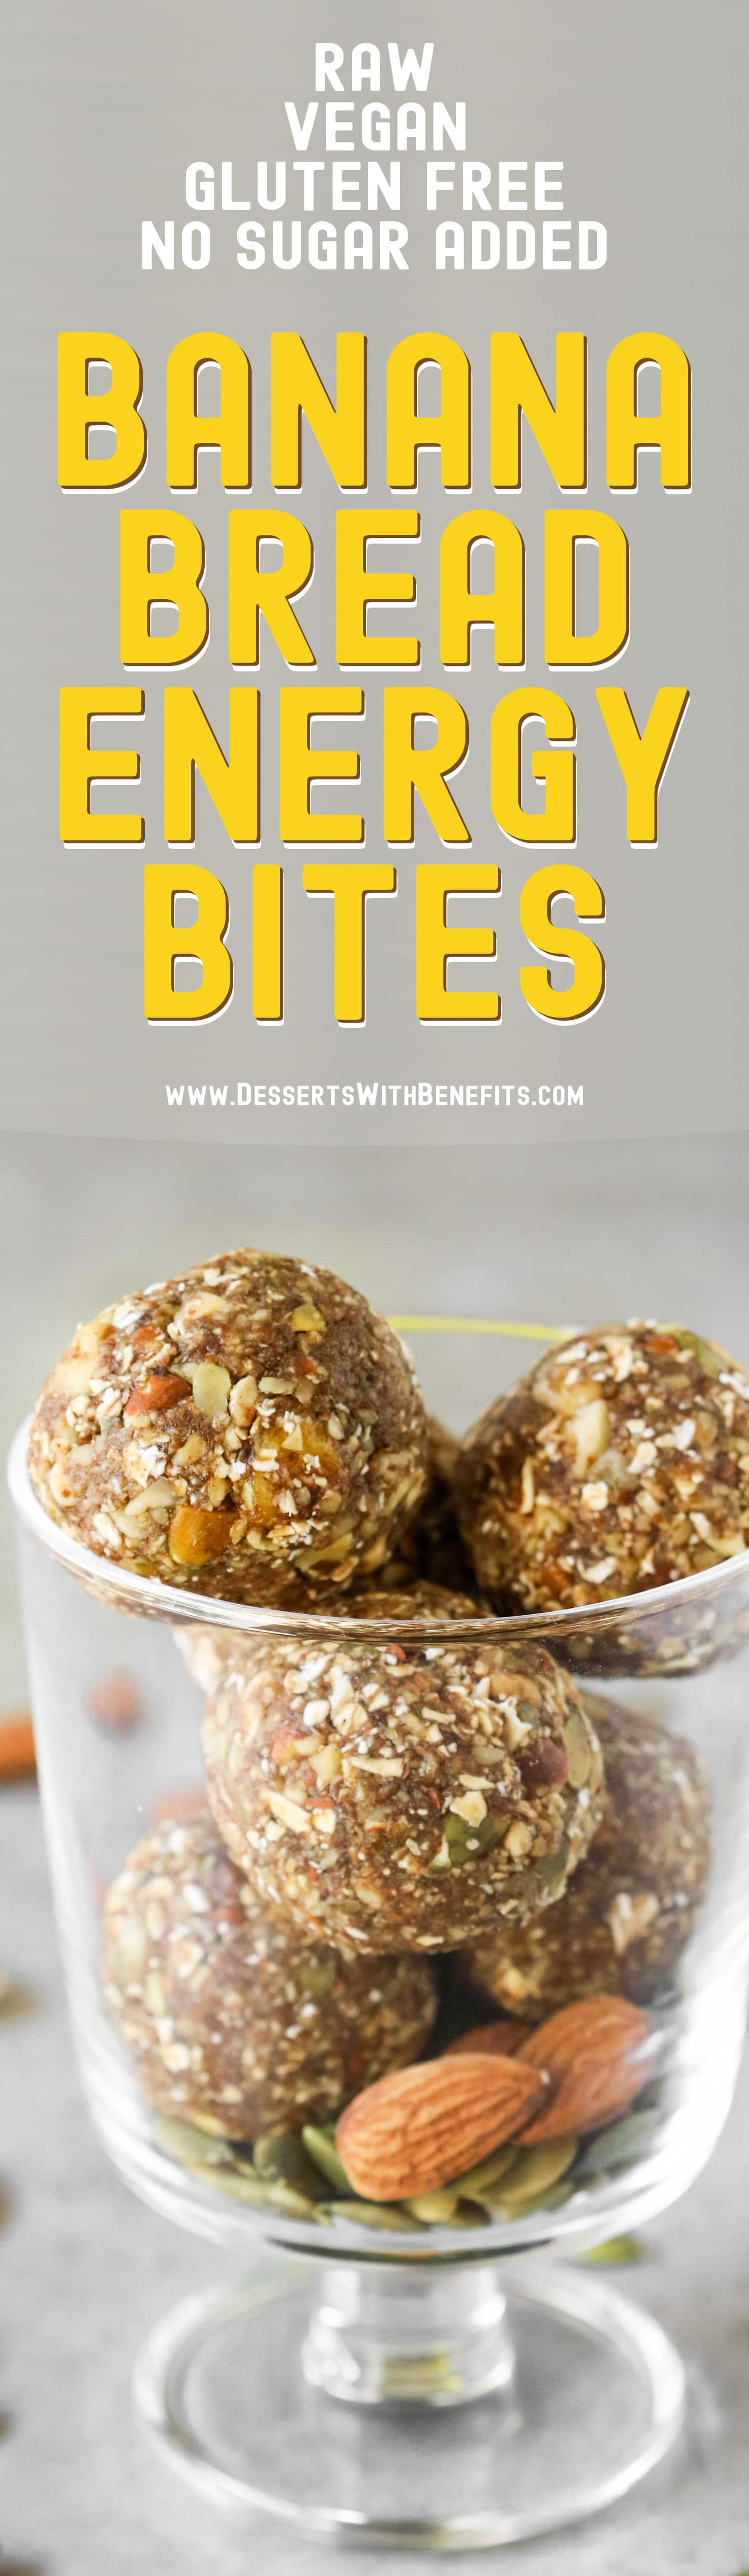 These Banana Bread No Bake Energy Bites are soft, fudgy, sweet, and delicious, it's hard to believe they're raw, vegan, and gluten free, with no added sugar! They're fast and easy to make with only seven ingredients required. Satisfy your banana bread cravings the healthy way with this energy bites recipe!